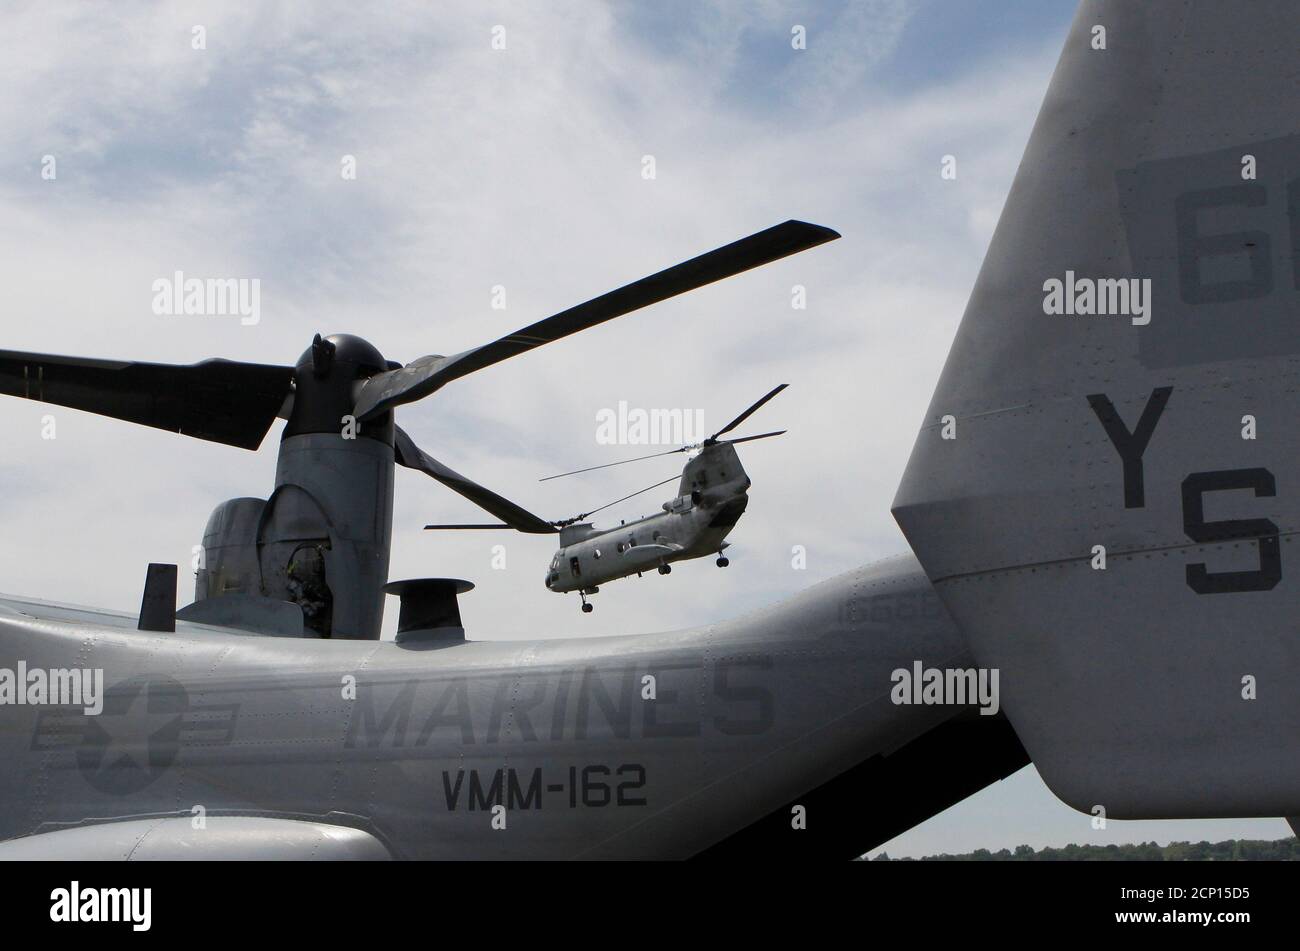 A Boeing CH-46 Sea Knight takes off over an MV-22 Osprey while taking part in a Marine Corps demonstration flight during Fleet Week in New York May 22, 2009.     REUTERS/Brendan McDermid (UNITED STATES MILITARY) Stock Photo